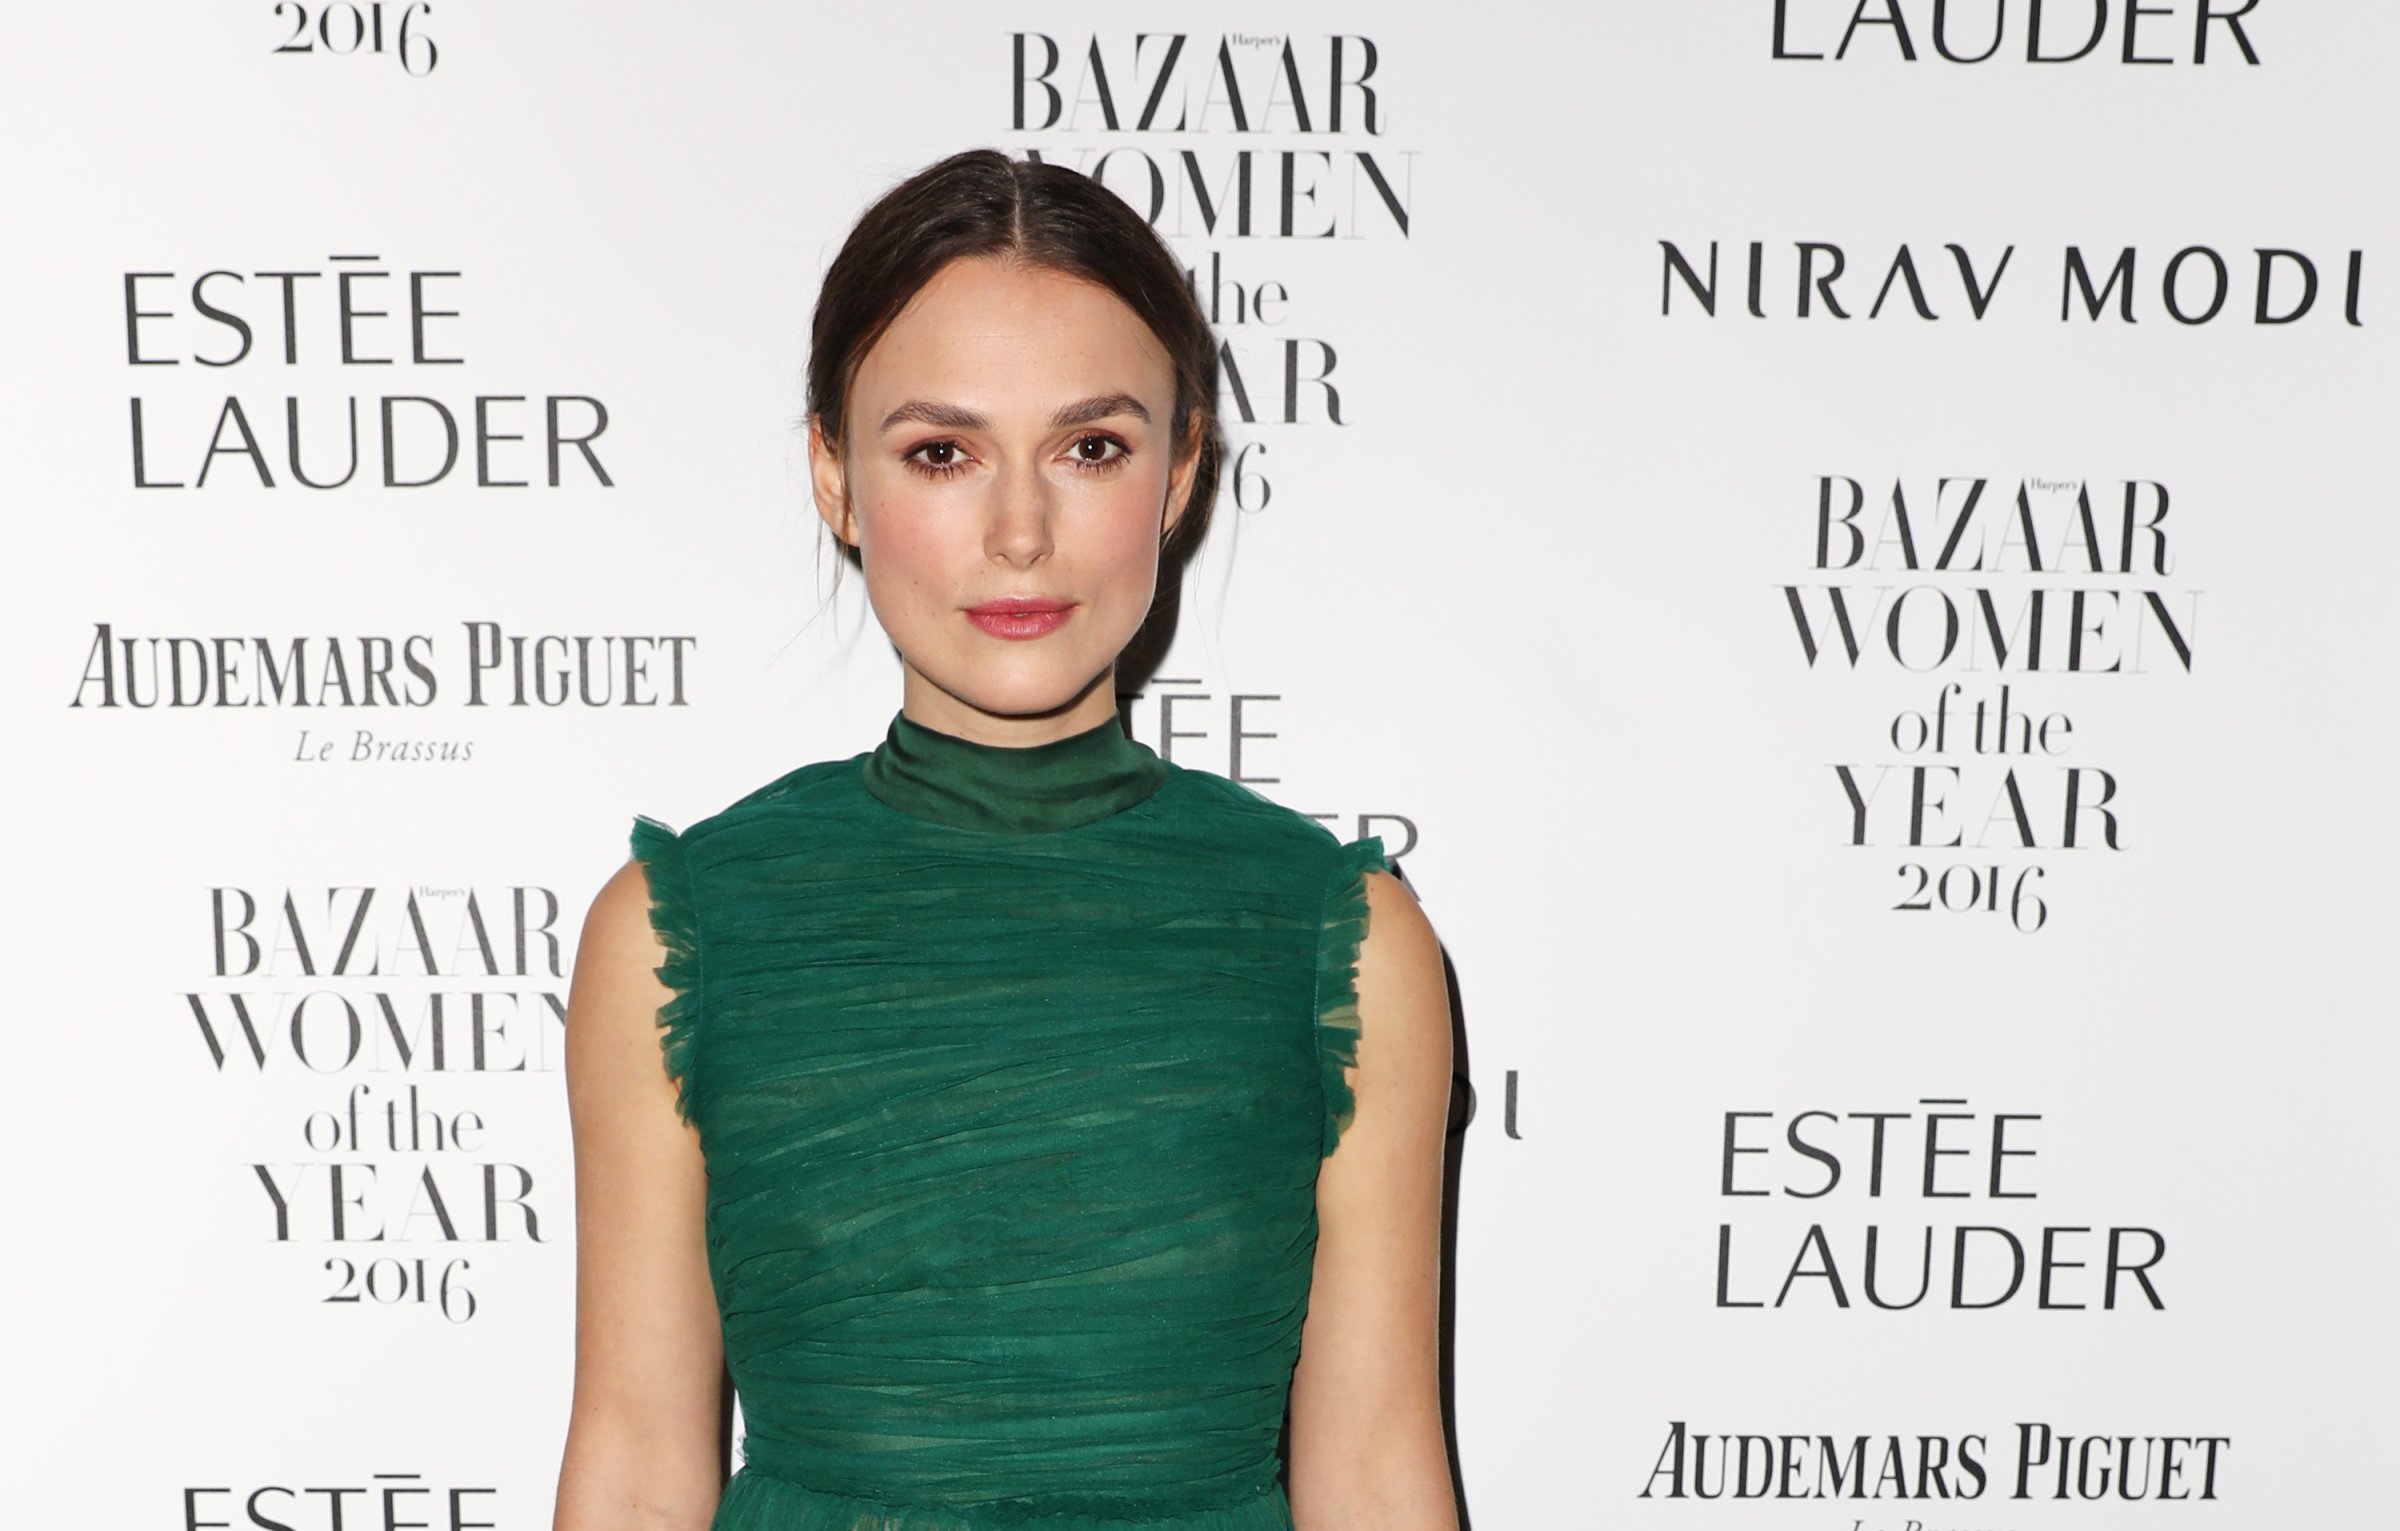 Keira Knightley attends the Harper's Bazaar Women of the Year Awards 2016 at Claridge's Hotel on October 31, 2016 in London, England.